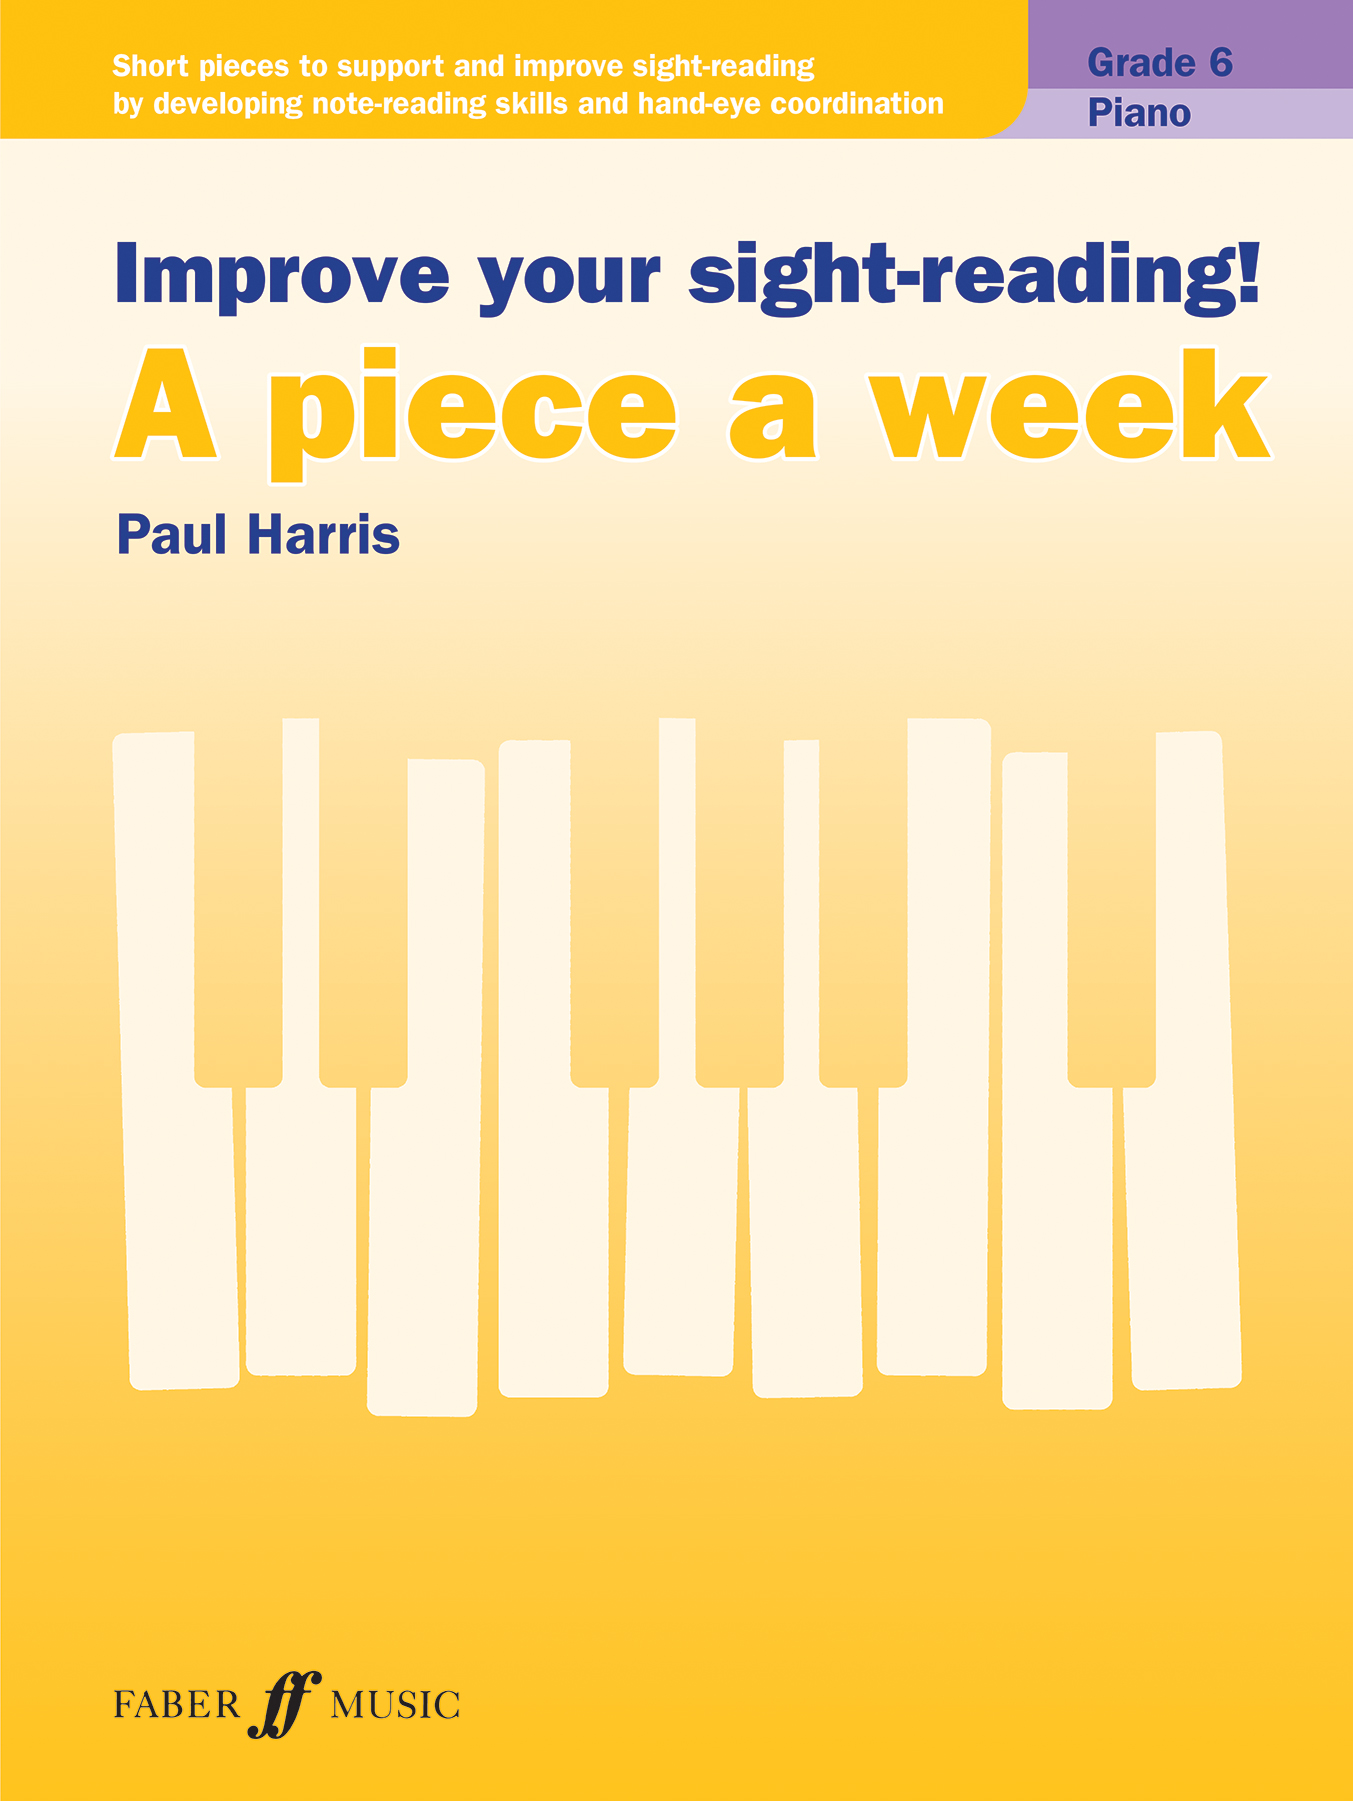 Improve your sight-reading! A piece a week Piano Grade 6 (HARRIS PAUL)